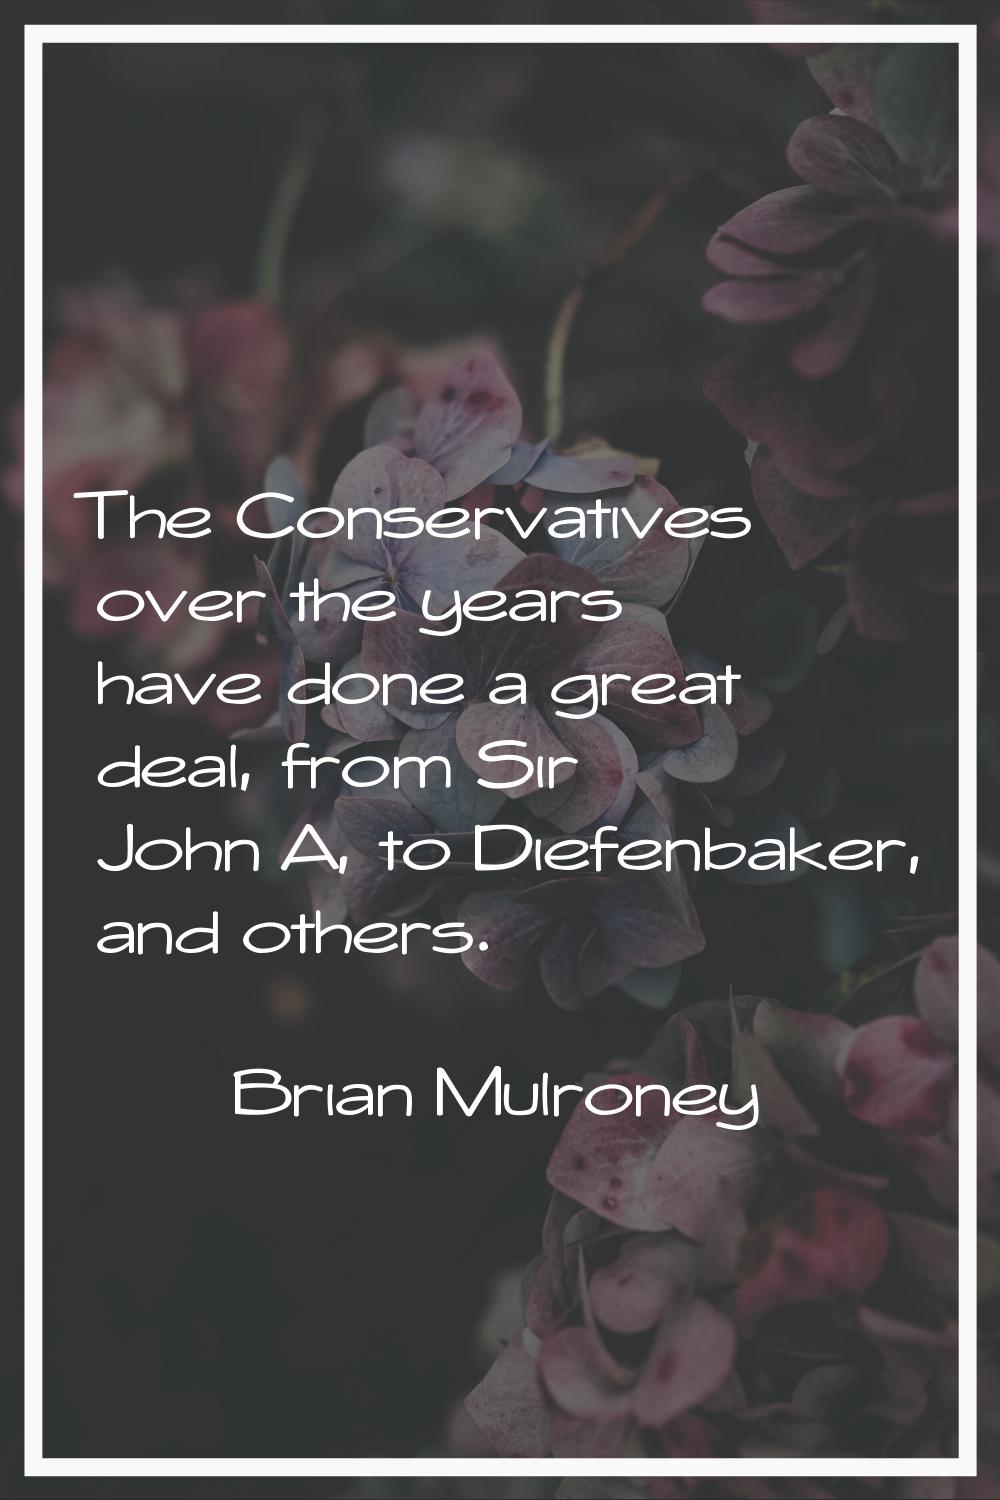 The Conservatives over the years have done a great deal, from Sir John A, to Diefenbaker, and other